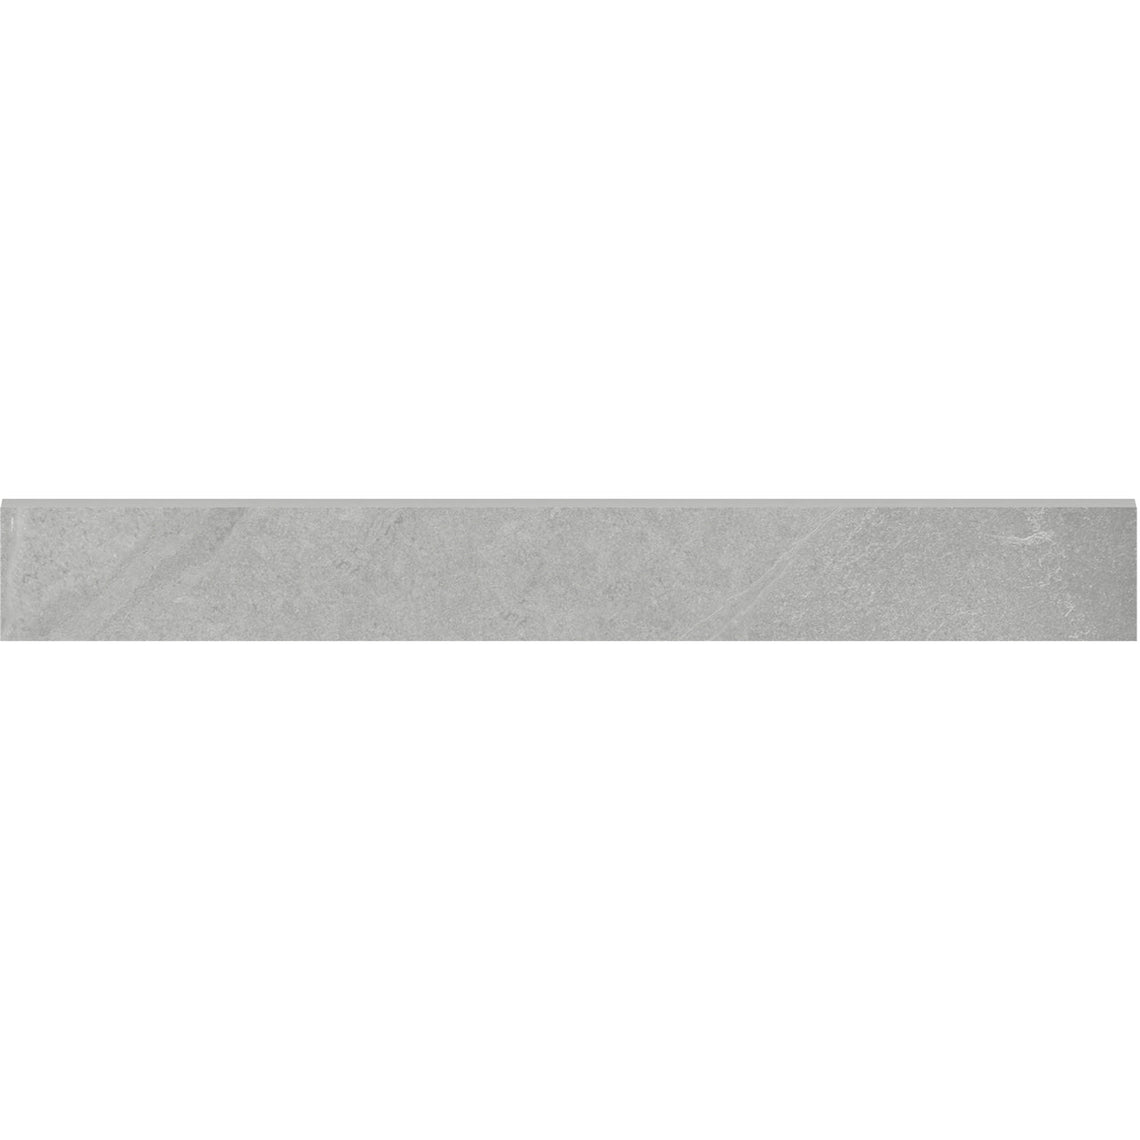 3 X 24 In Nord Lithium Matte Color Body Porcelain Bullnose